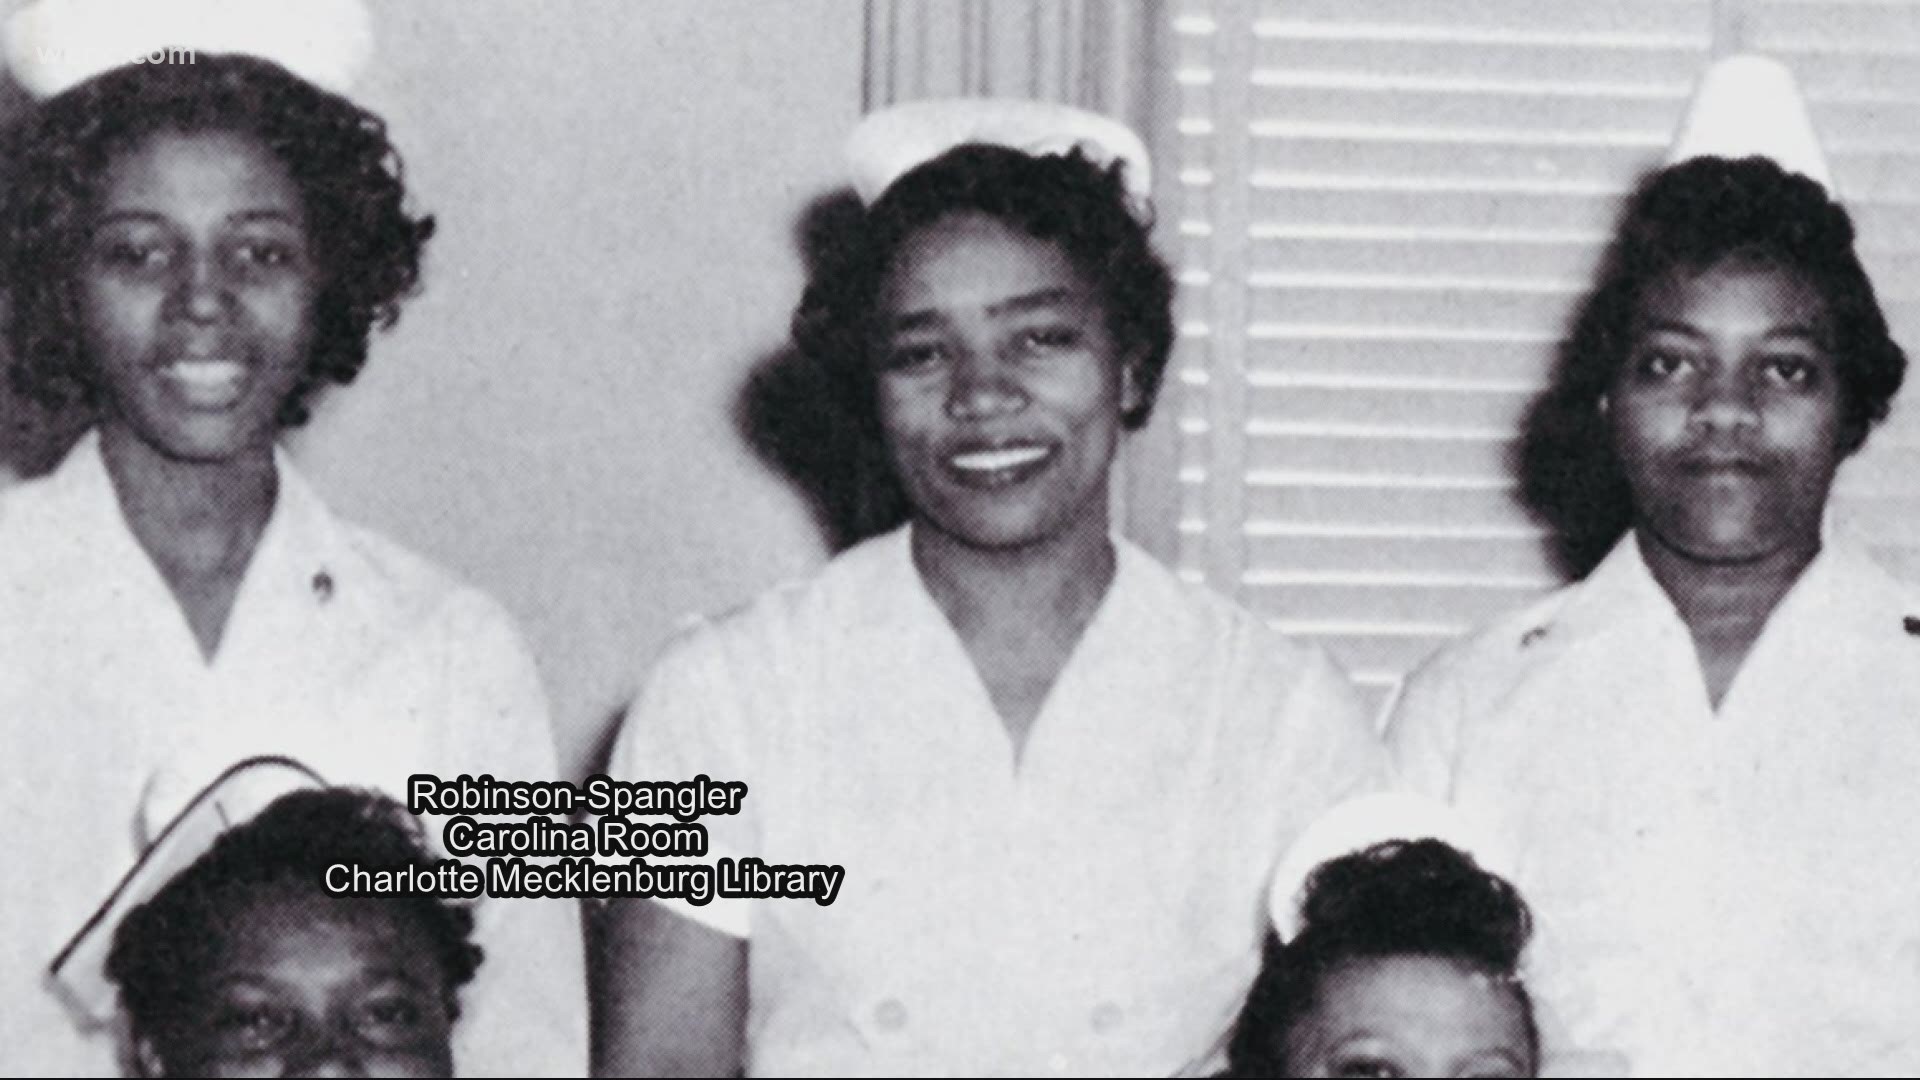 In 1962, Theresa Clark Elder became the first Black nurse to integrate the public health system in Mecklenburg County. Her career spanned nearly 50 years.